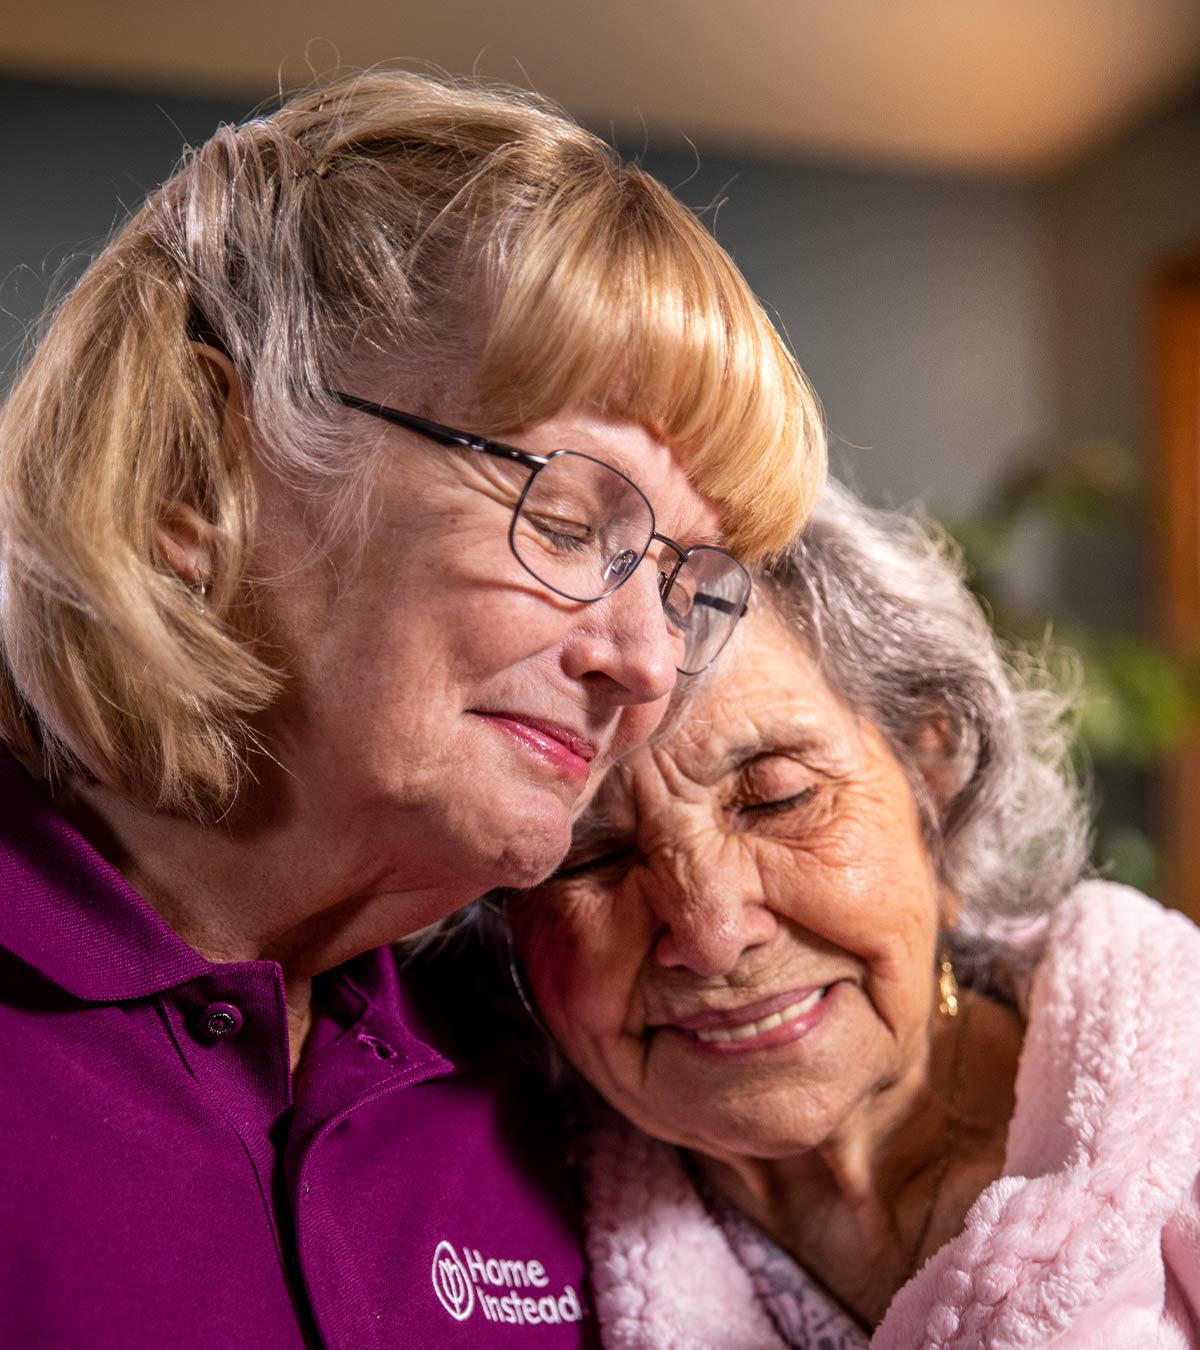 CAREGiver providing in-home senior care services. Home Instead of Denver, CO provides Elder Care to aging adults. 